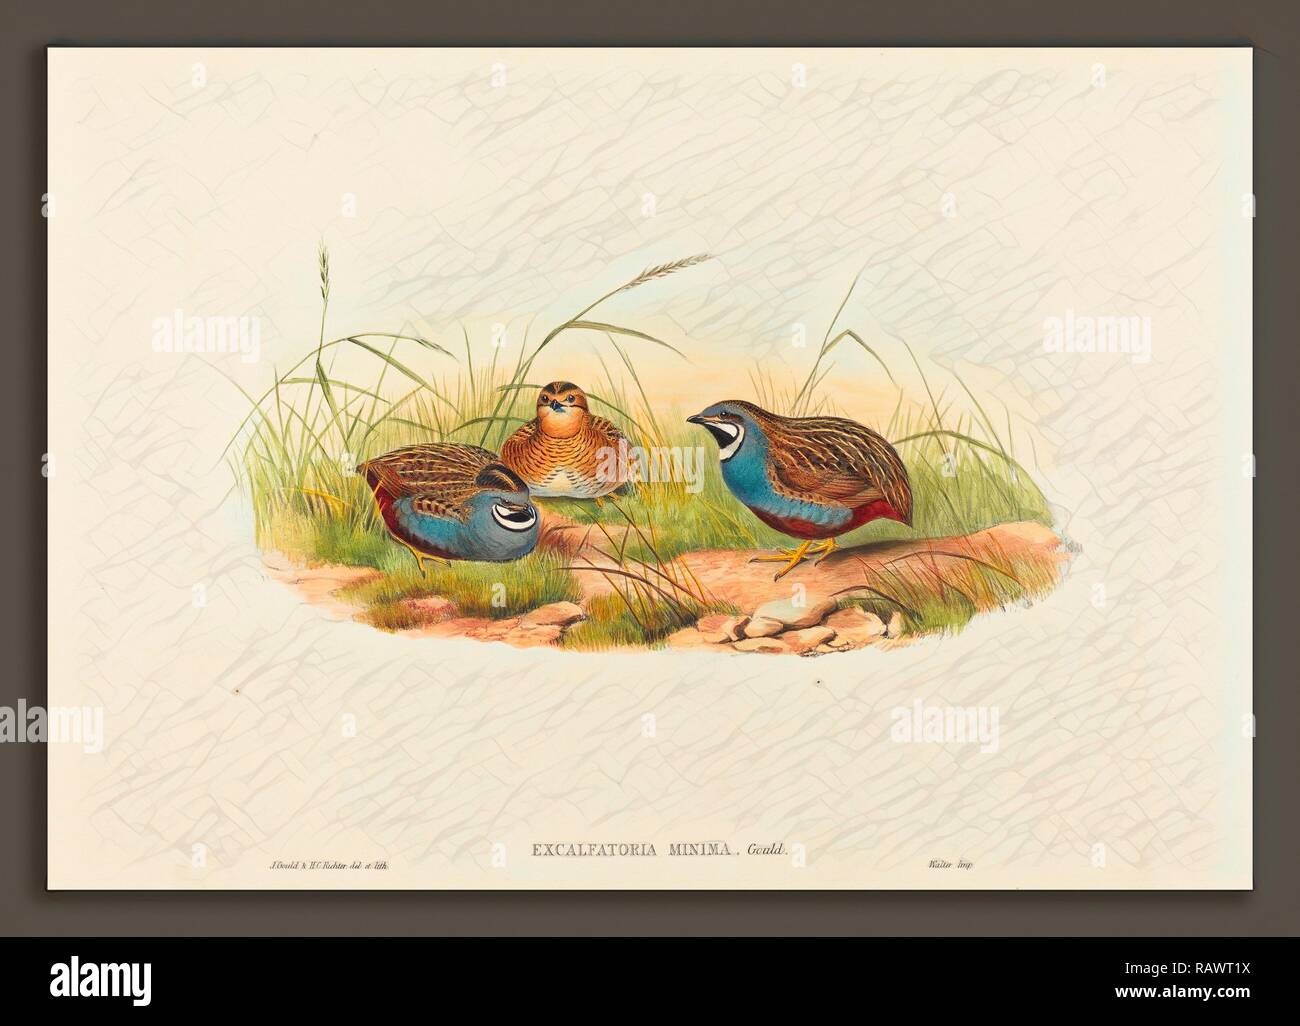 John Gould and H.C. Richter (British (?), active 1841 - active c. 1881), Excalftoria minima (Blue-breasted Quail reimagined Stock Photo